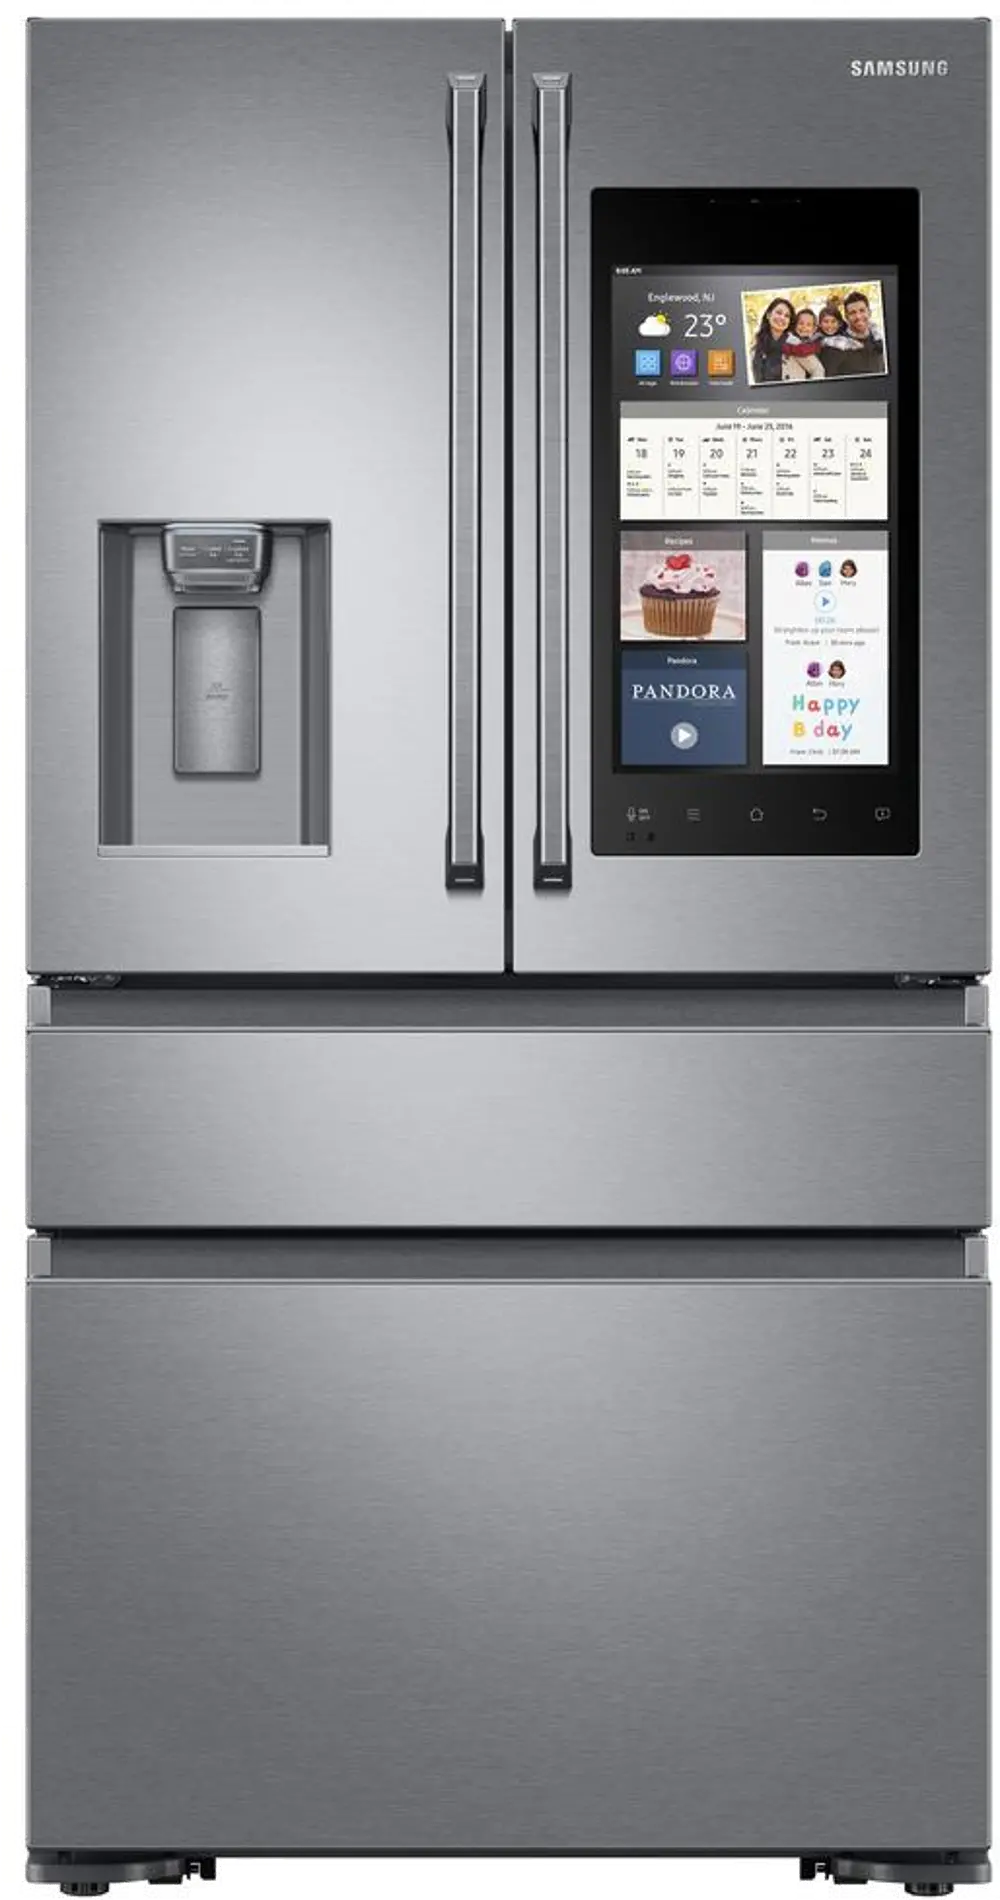 RF23M8590SR Samsung Counter Depth French Door Smart Refrigerator with Family Hub - 22.2 cu. ft., 36 Inch Stainless Steel-1